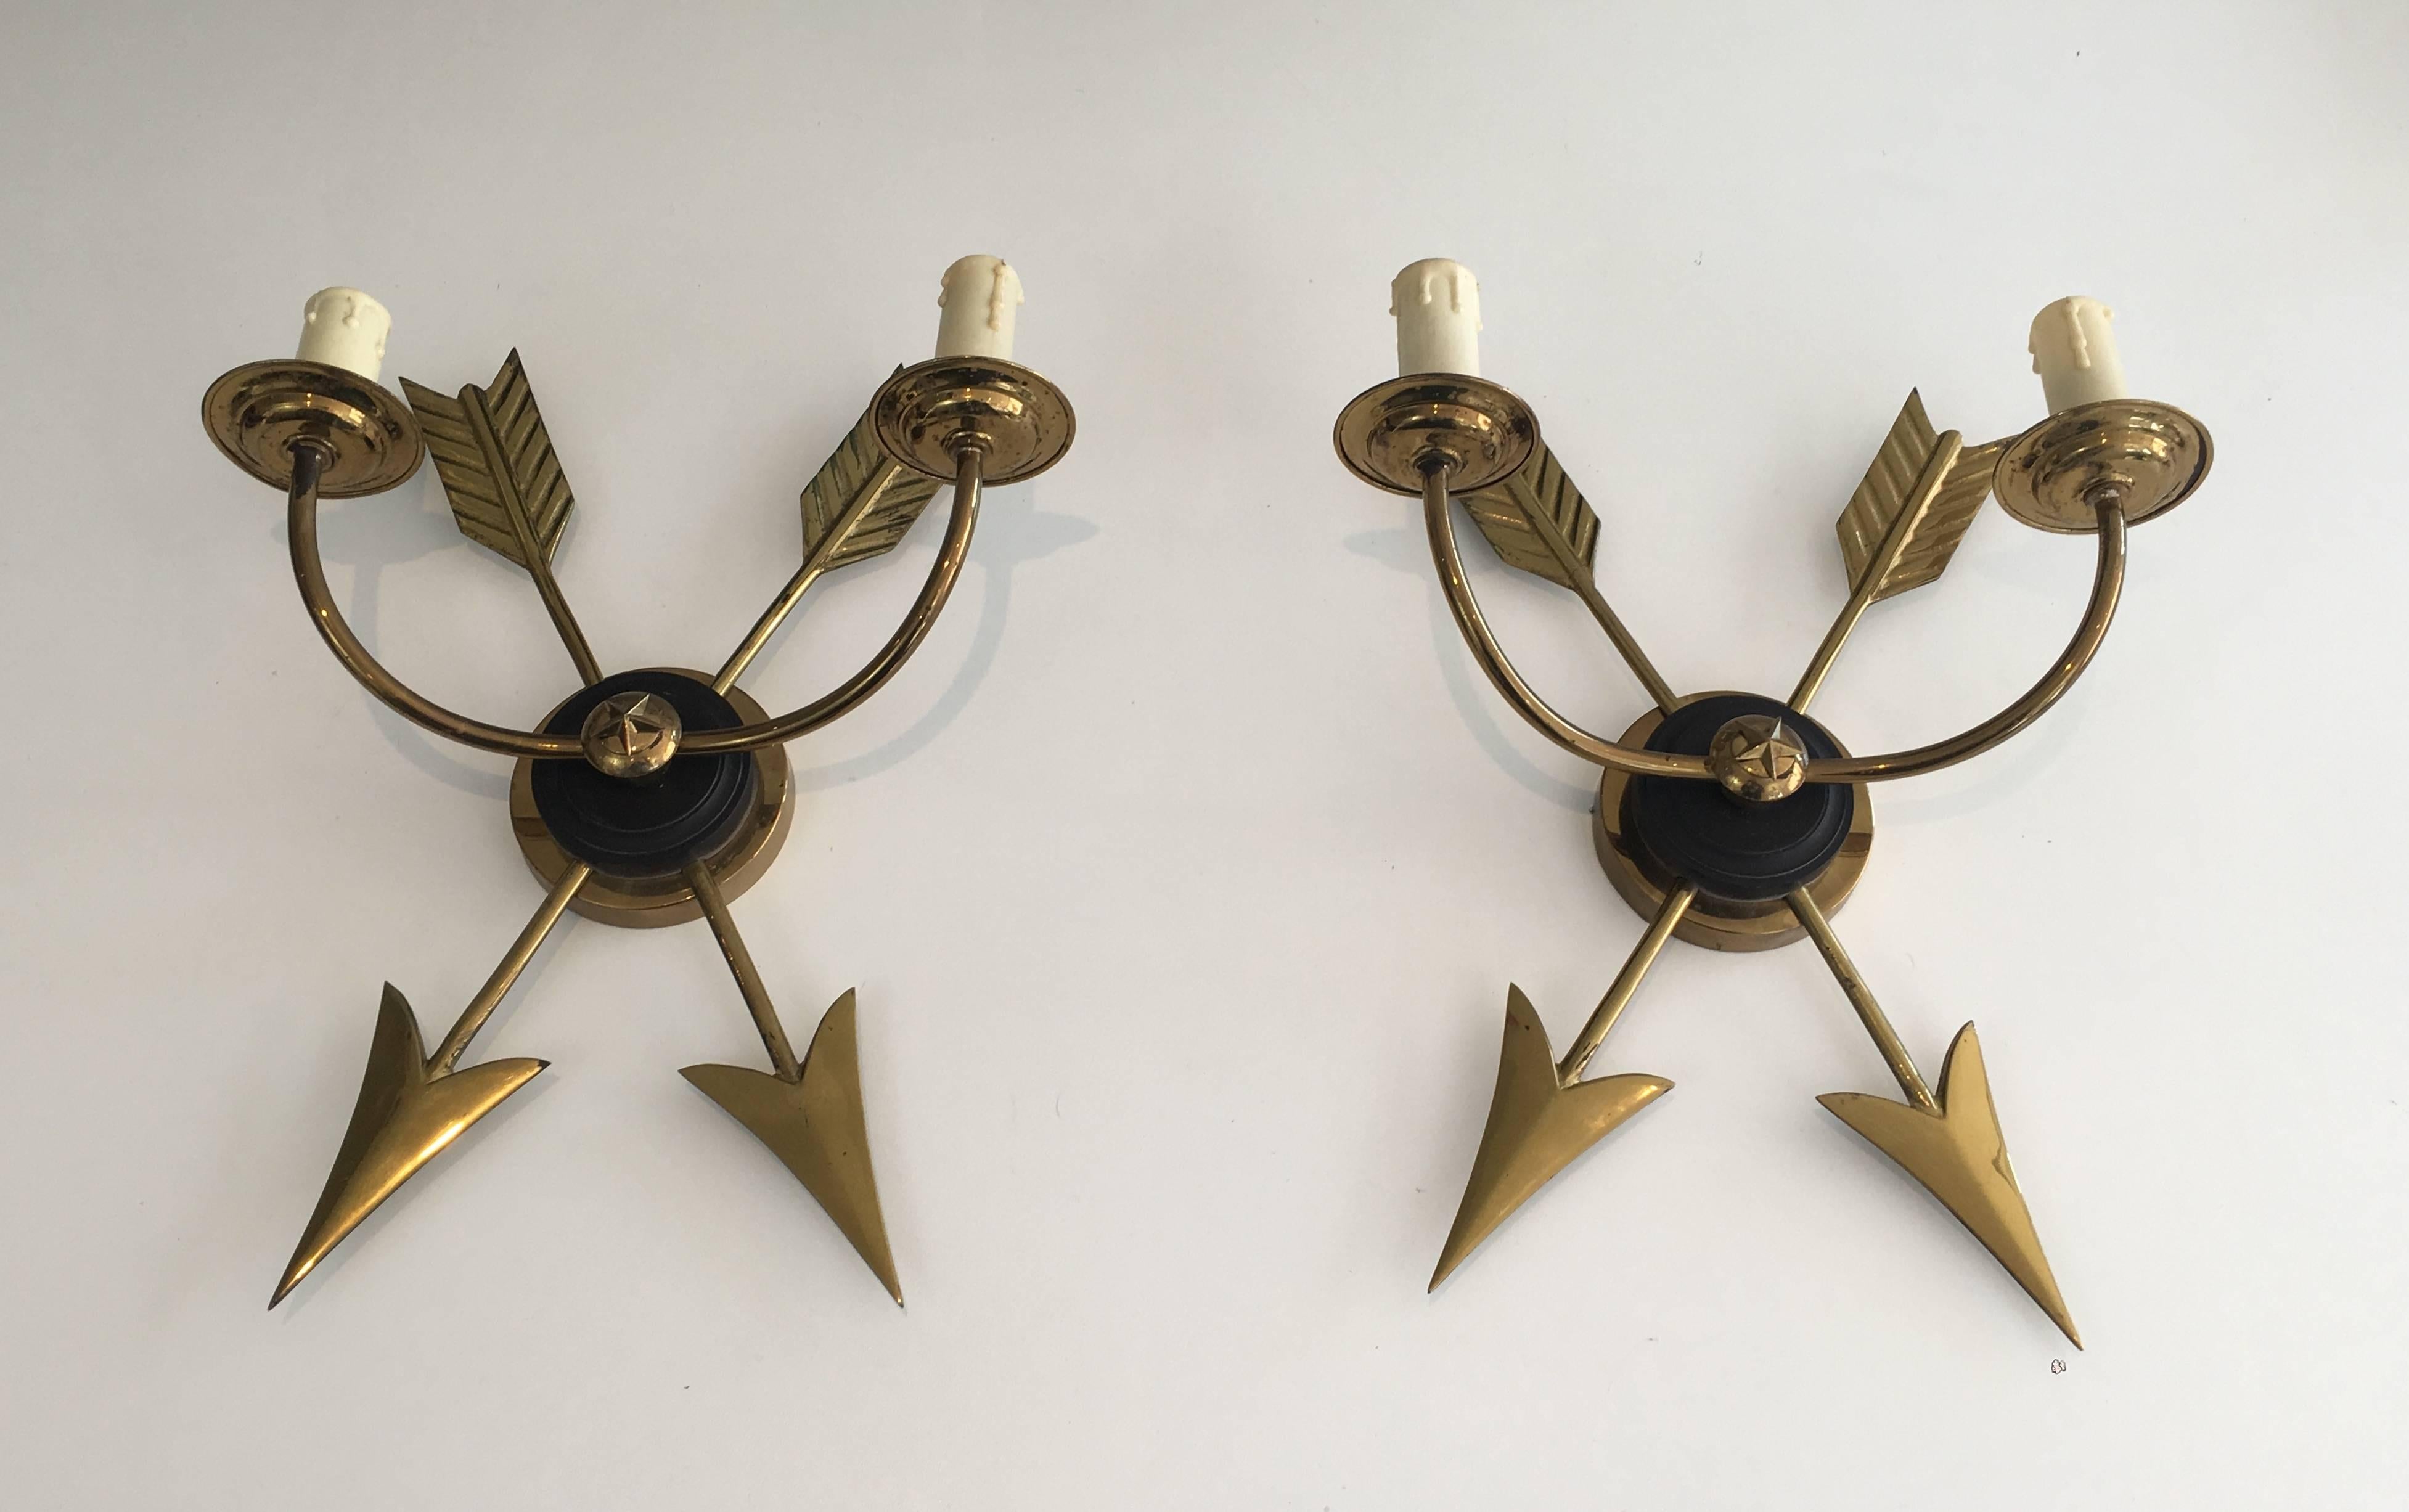 Pair of French neoclassical style brass sconces with double crossed arrows, circa 1960s

These sconces are currently in France, please allow 2 to 4 weeks for delivery to our warehouse in Long Island City, NY.

 